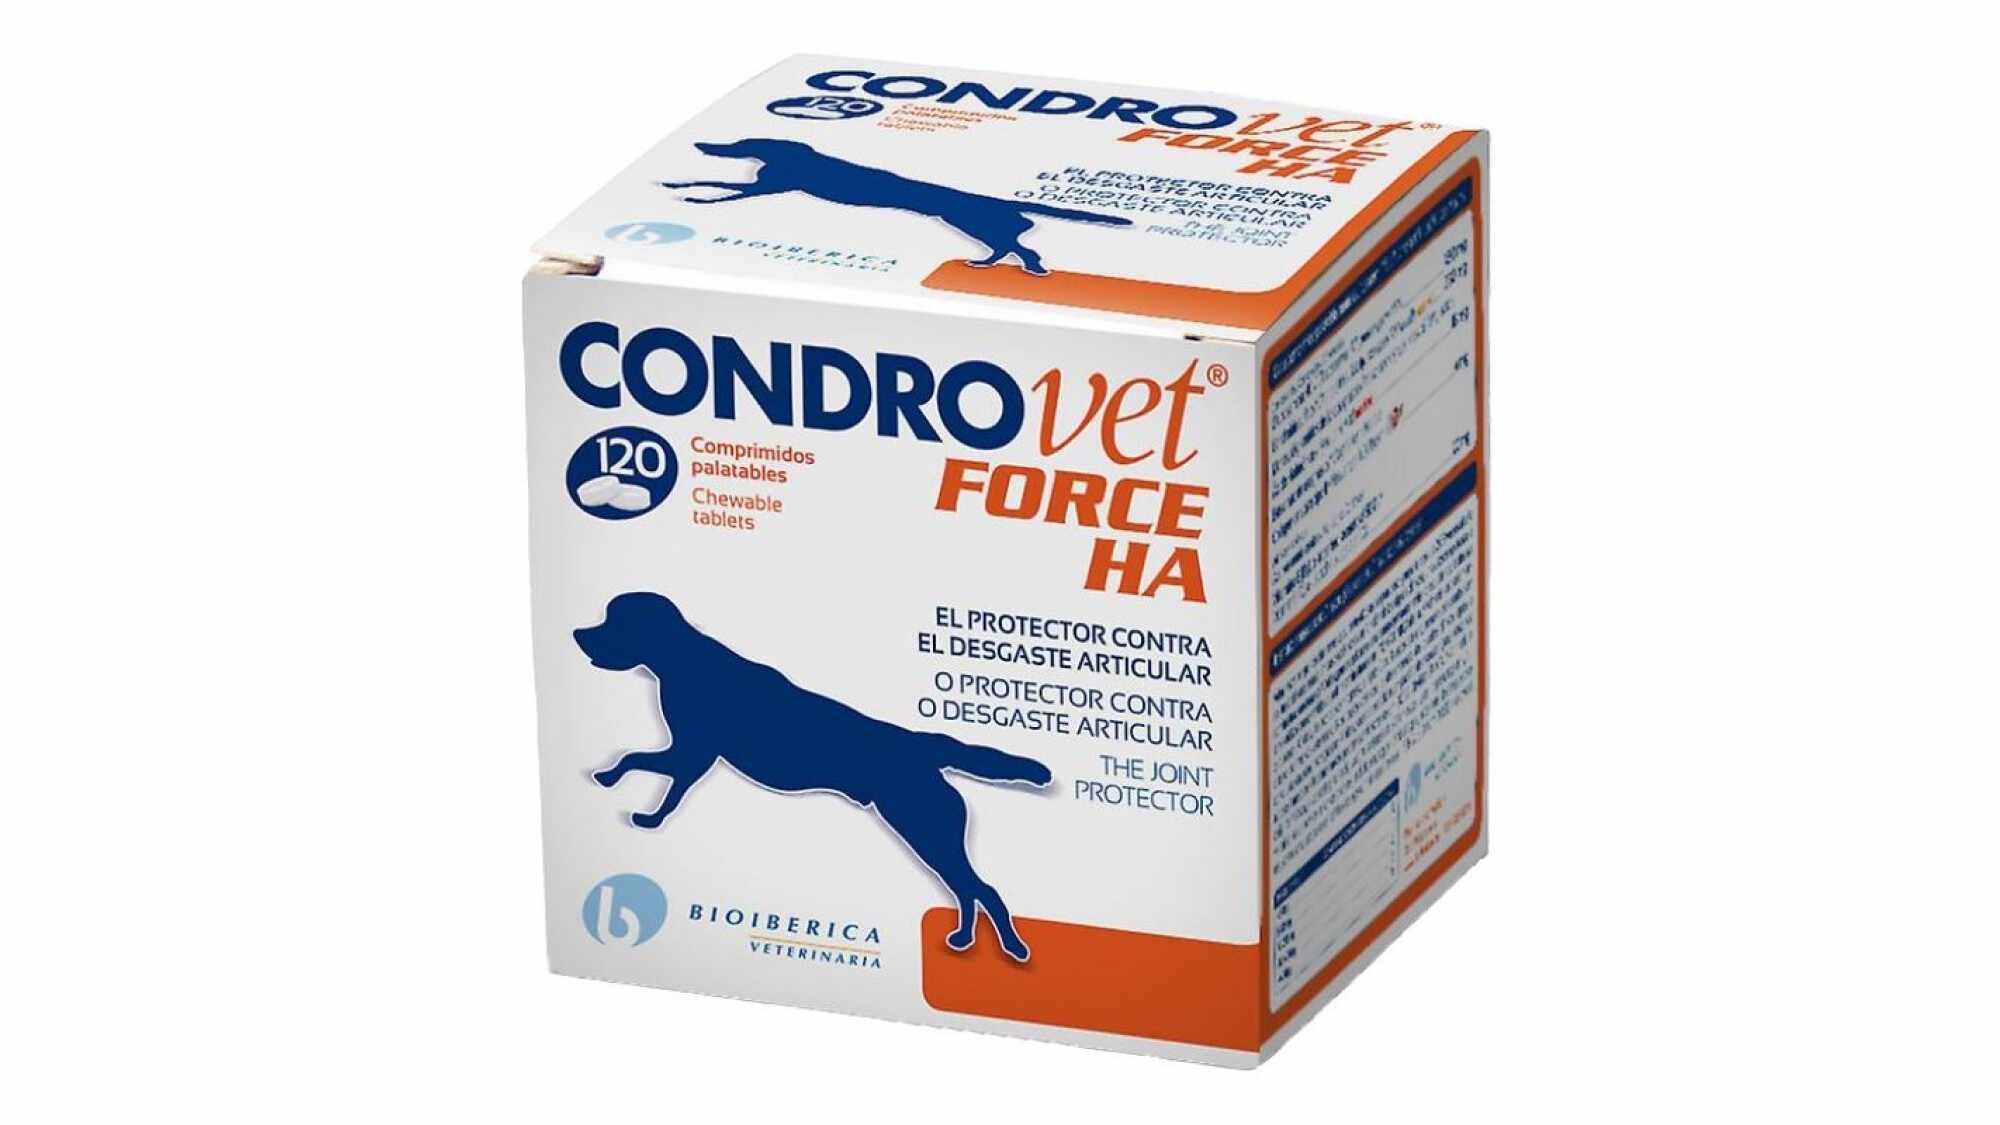 Condrovet Force HA For Dog, 240 Tablete